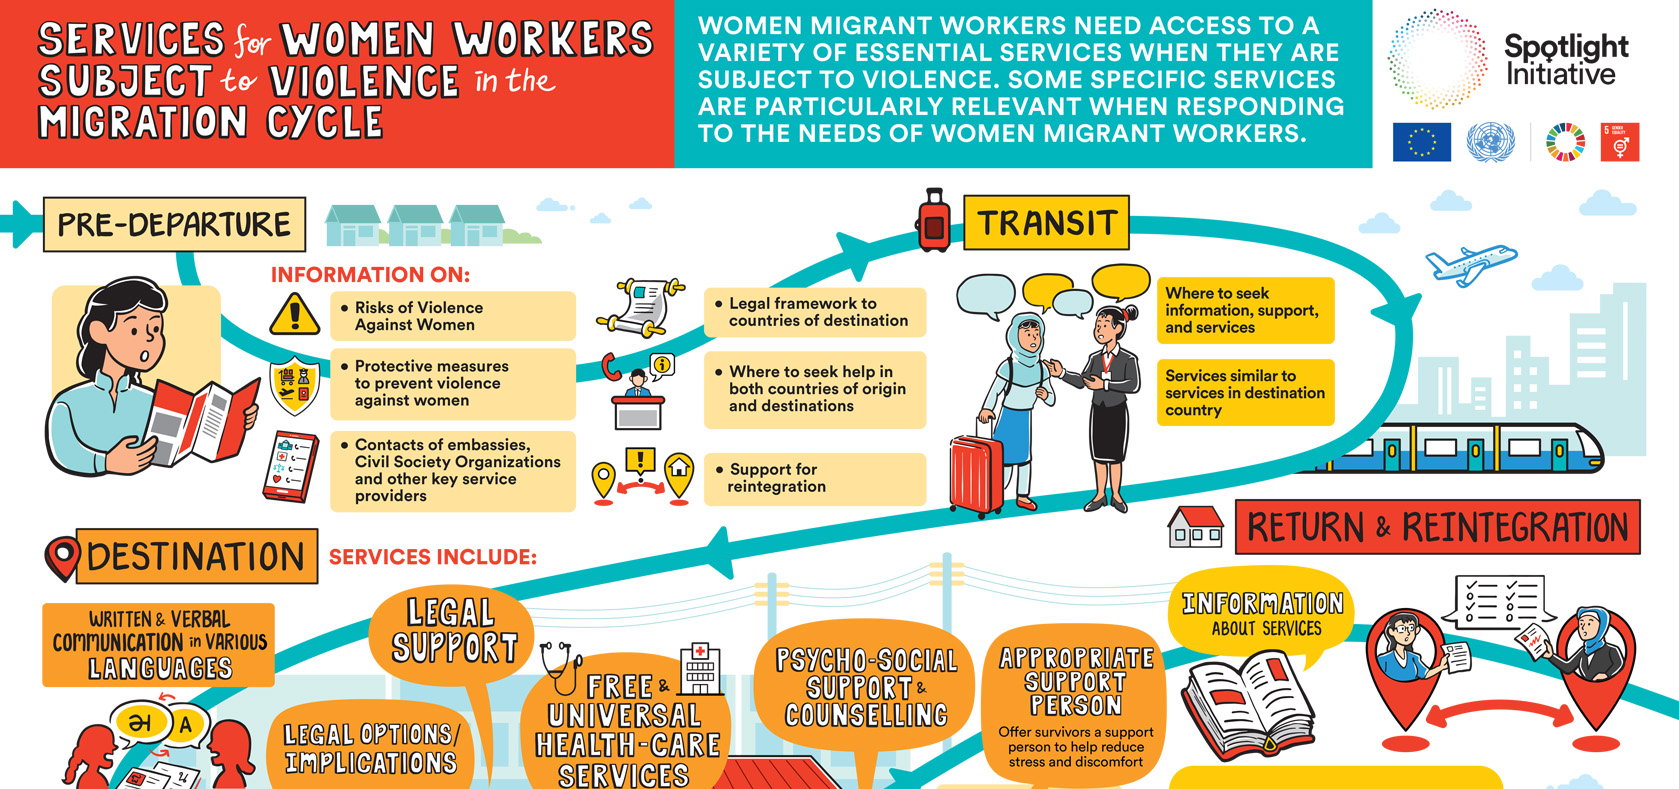 Risks of Violence against Women in the Labour Migration Cycle and Services that Need to be in Place throughout the Migration Cycle